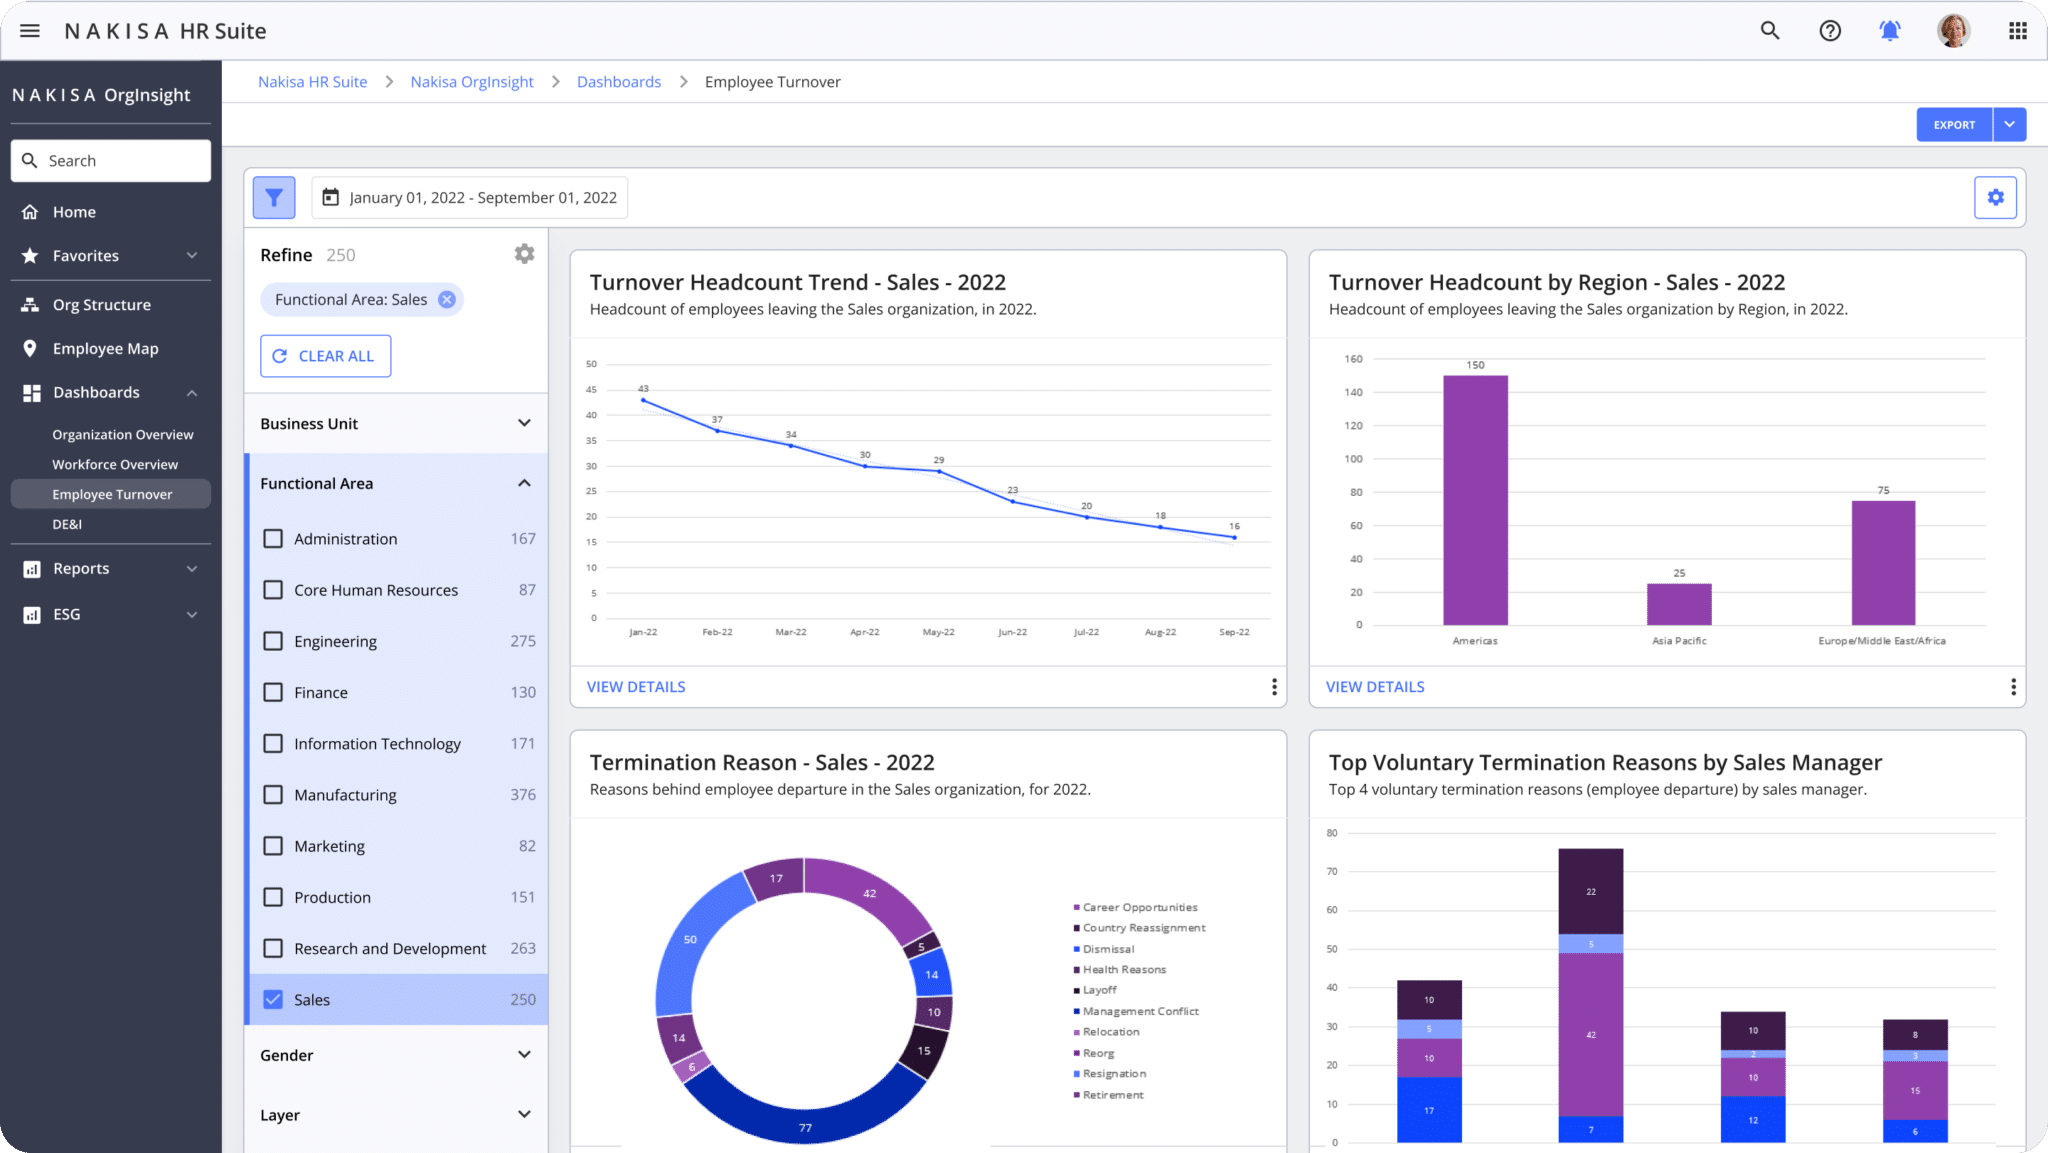 HR data and charts